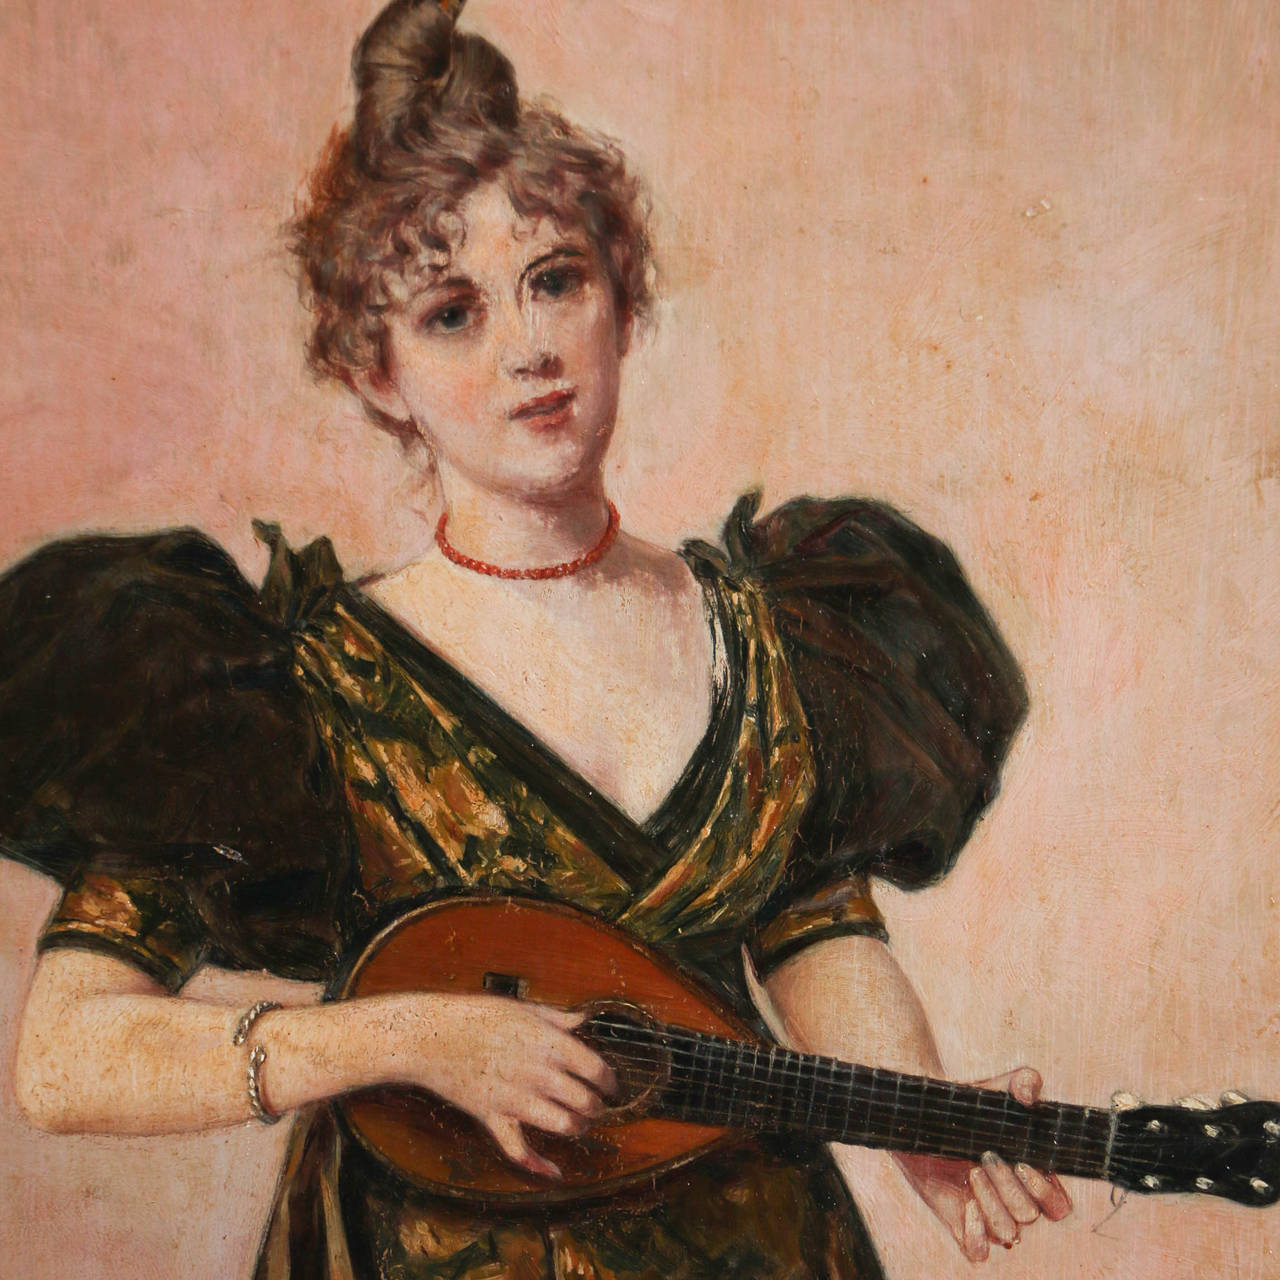 Female portrait, oil on wood. Young lady dressed in green and gold playing  a musical instrument. Signed and dated, Wald Sichelkow, 1897. This artist's full name is Valdemar Sichelkow.